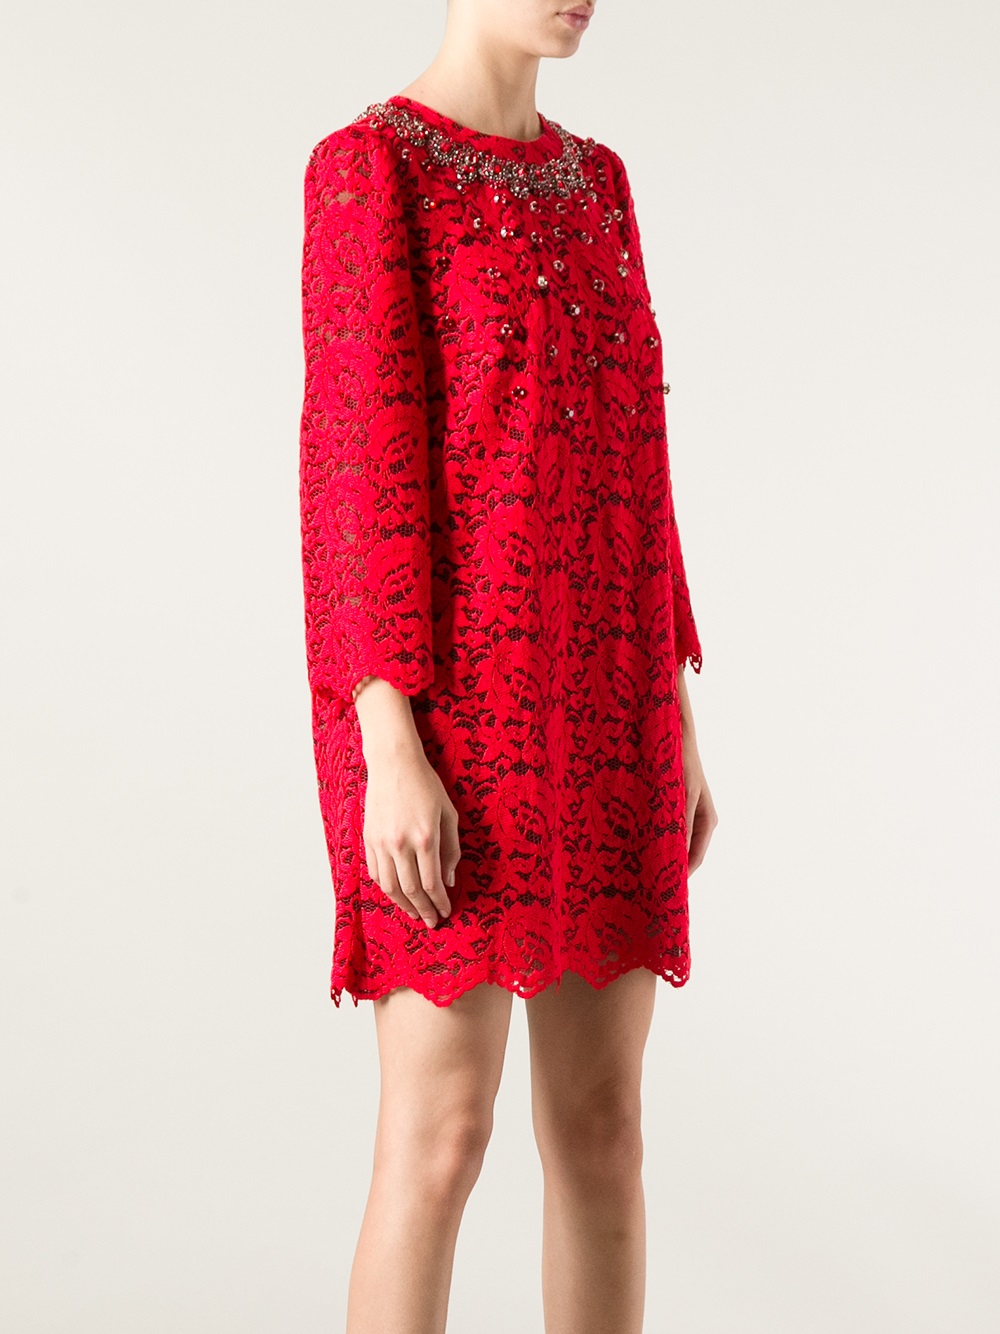 Dolce & gabbana Lace Shift Dress in Red | Lyst